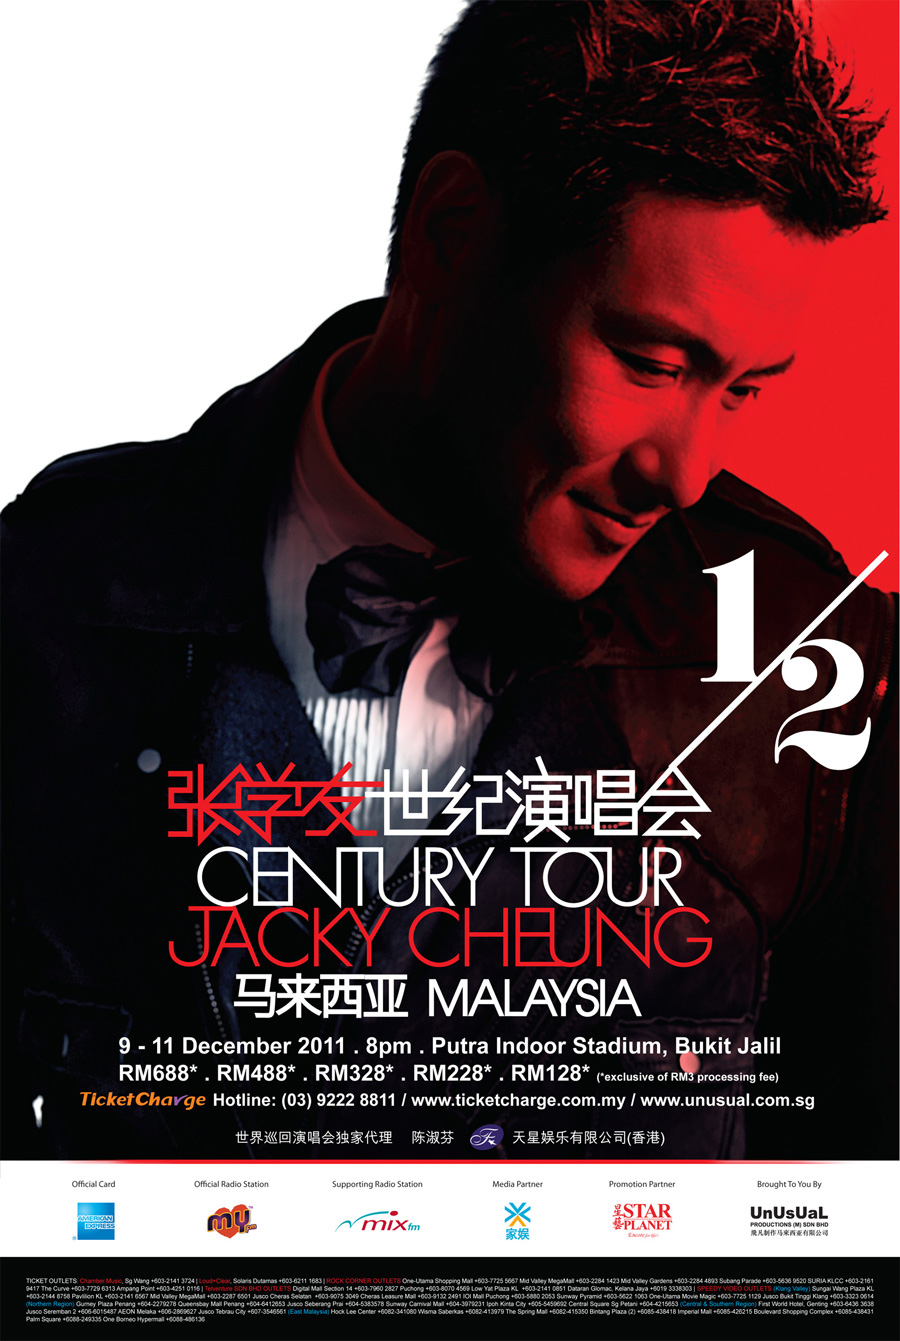 Jacky Cheung - Images